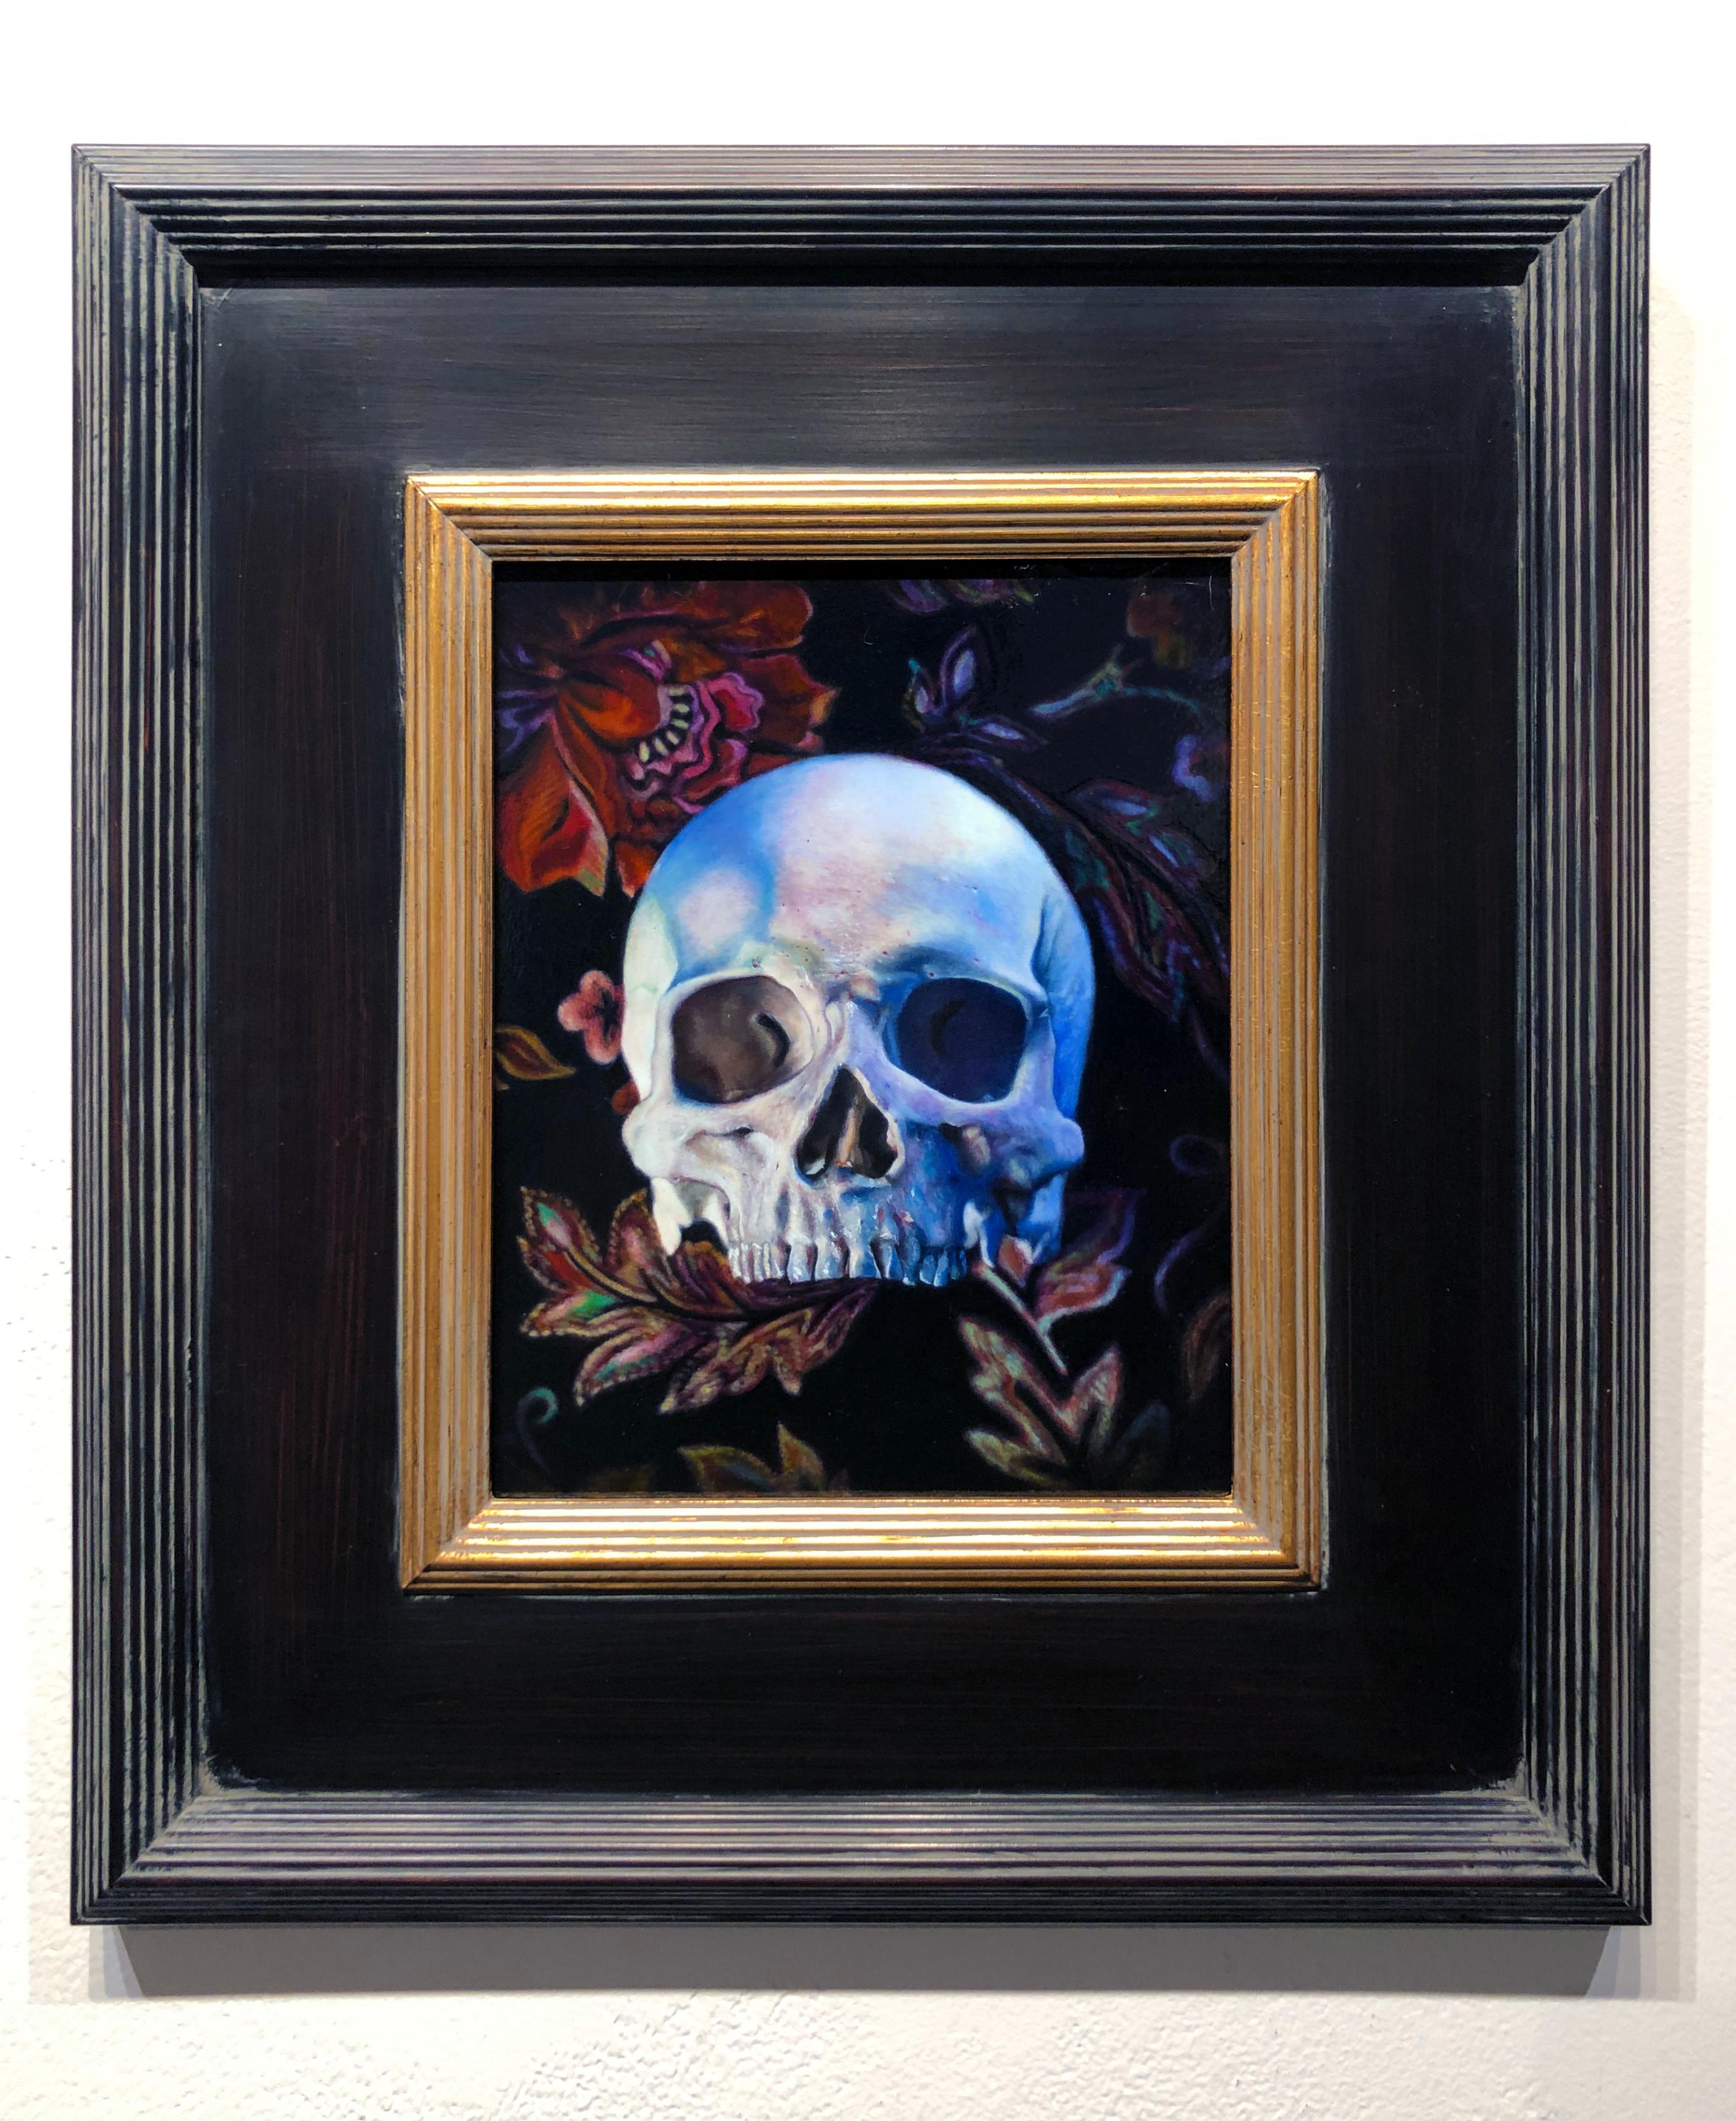 This extraordinary painting of a human skull is created in the 16th or 17th century Dutch style.  Vanitas paintings are a unique genre in which symbols of death are painted as a reminder of the transience of life, the futility of pleasure and the